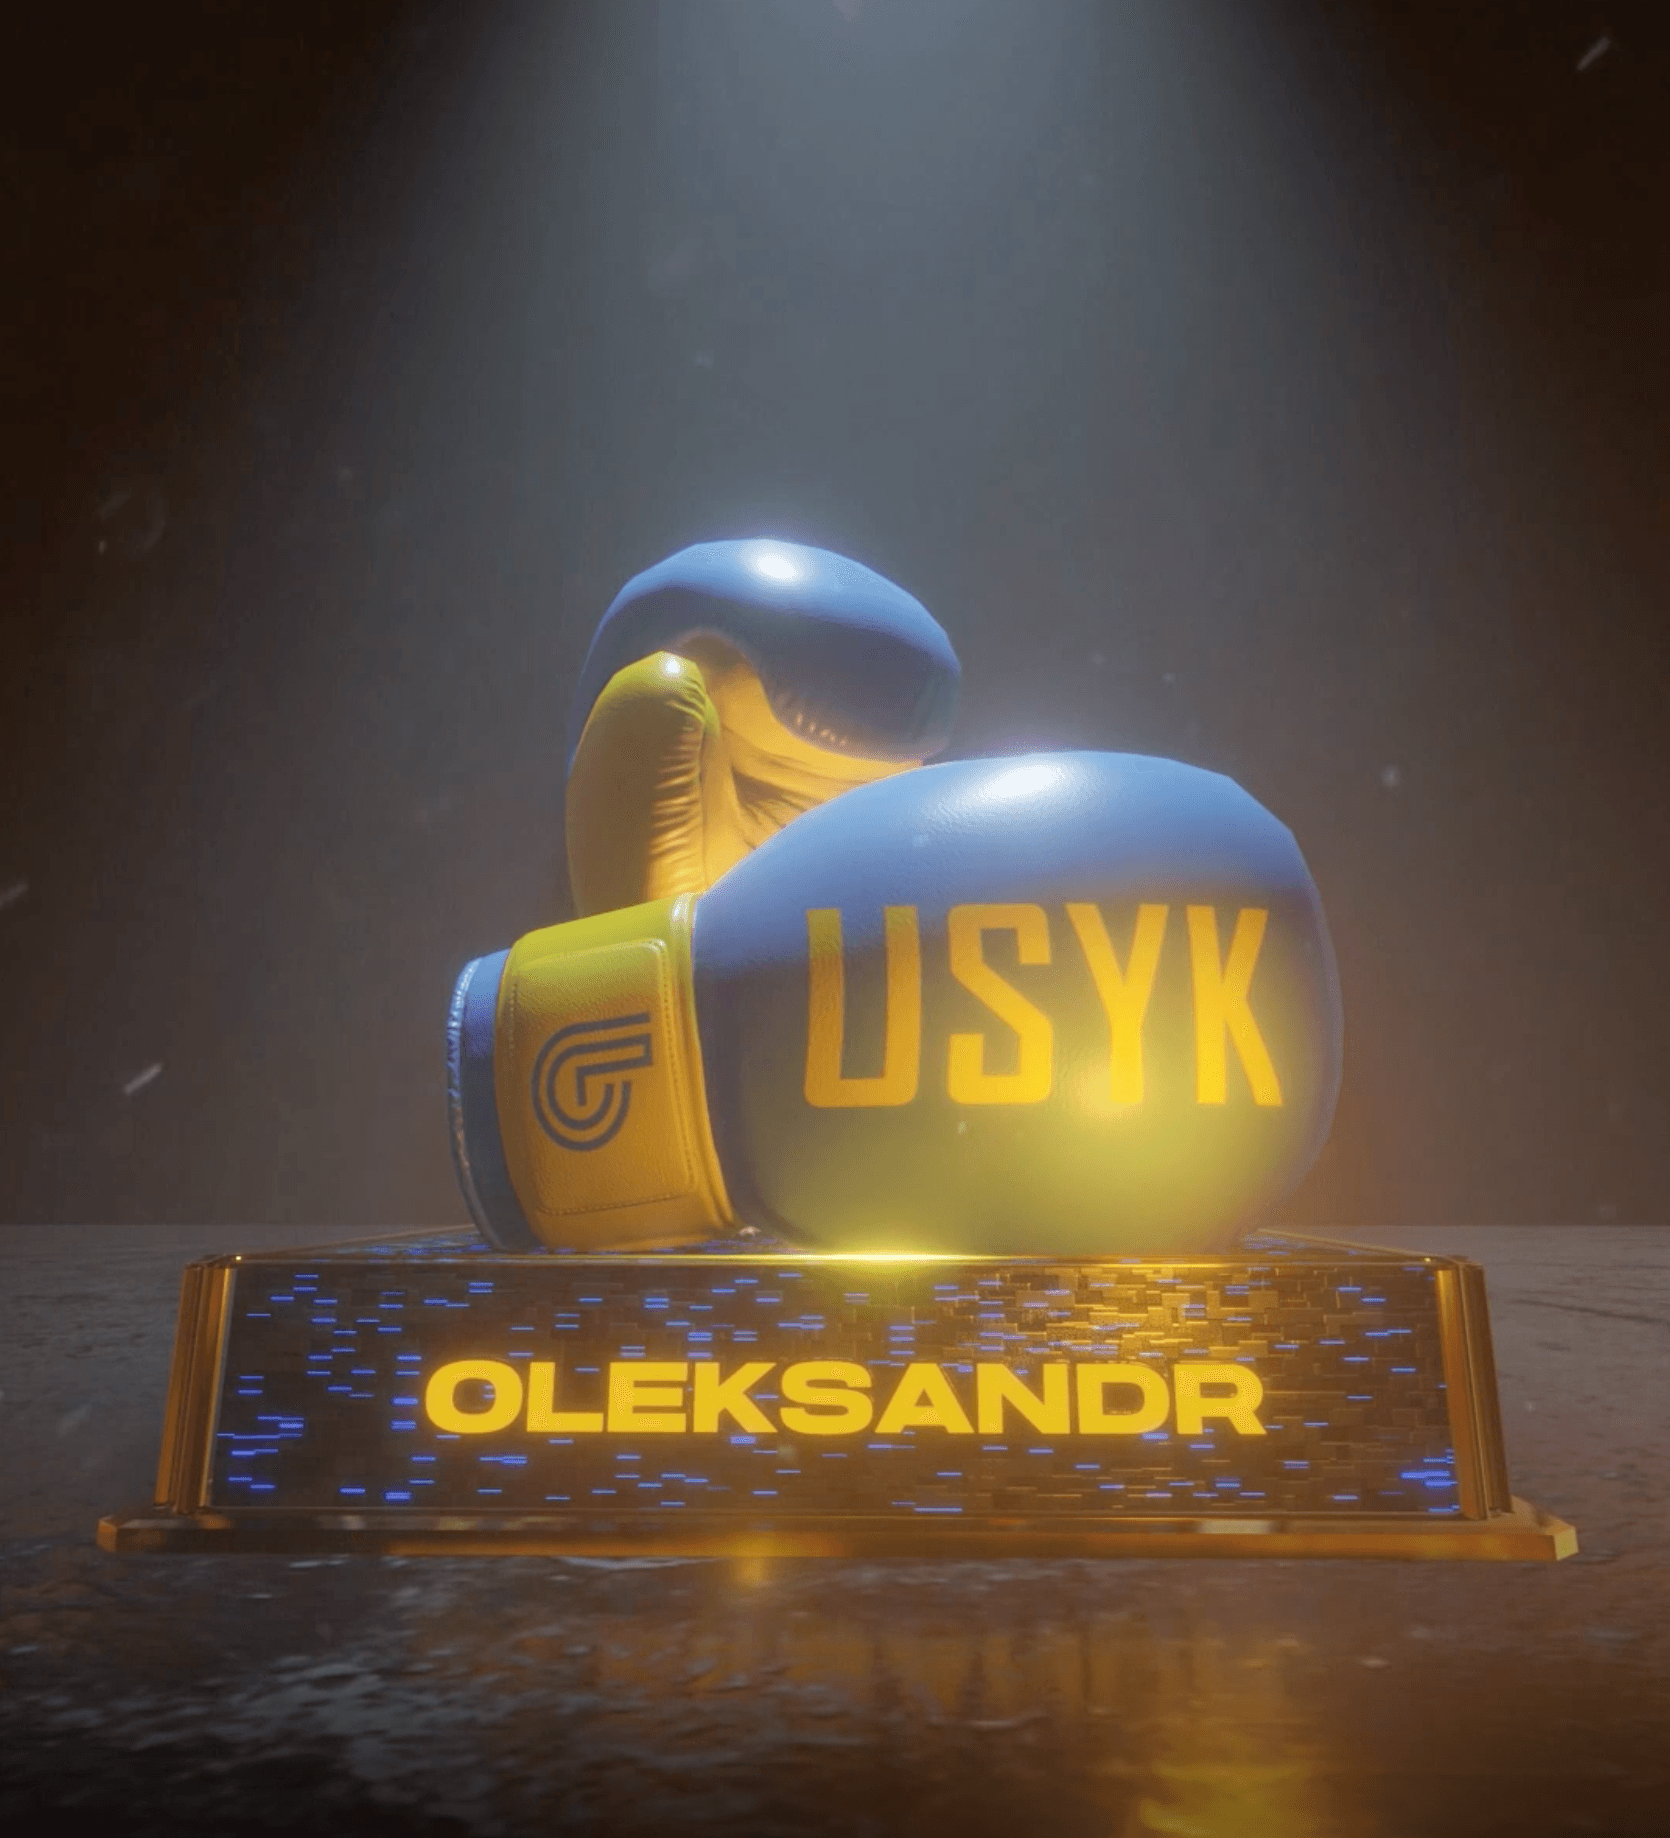 The Official NFT Collection of Oleksandr Usyk